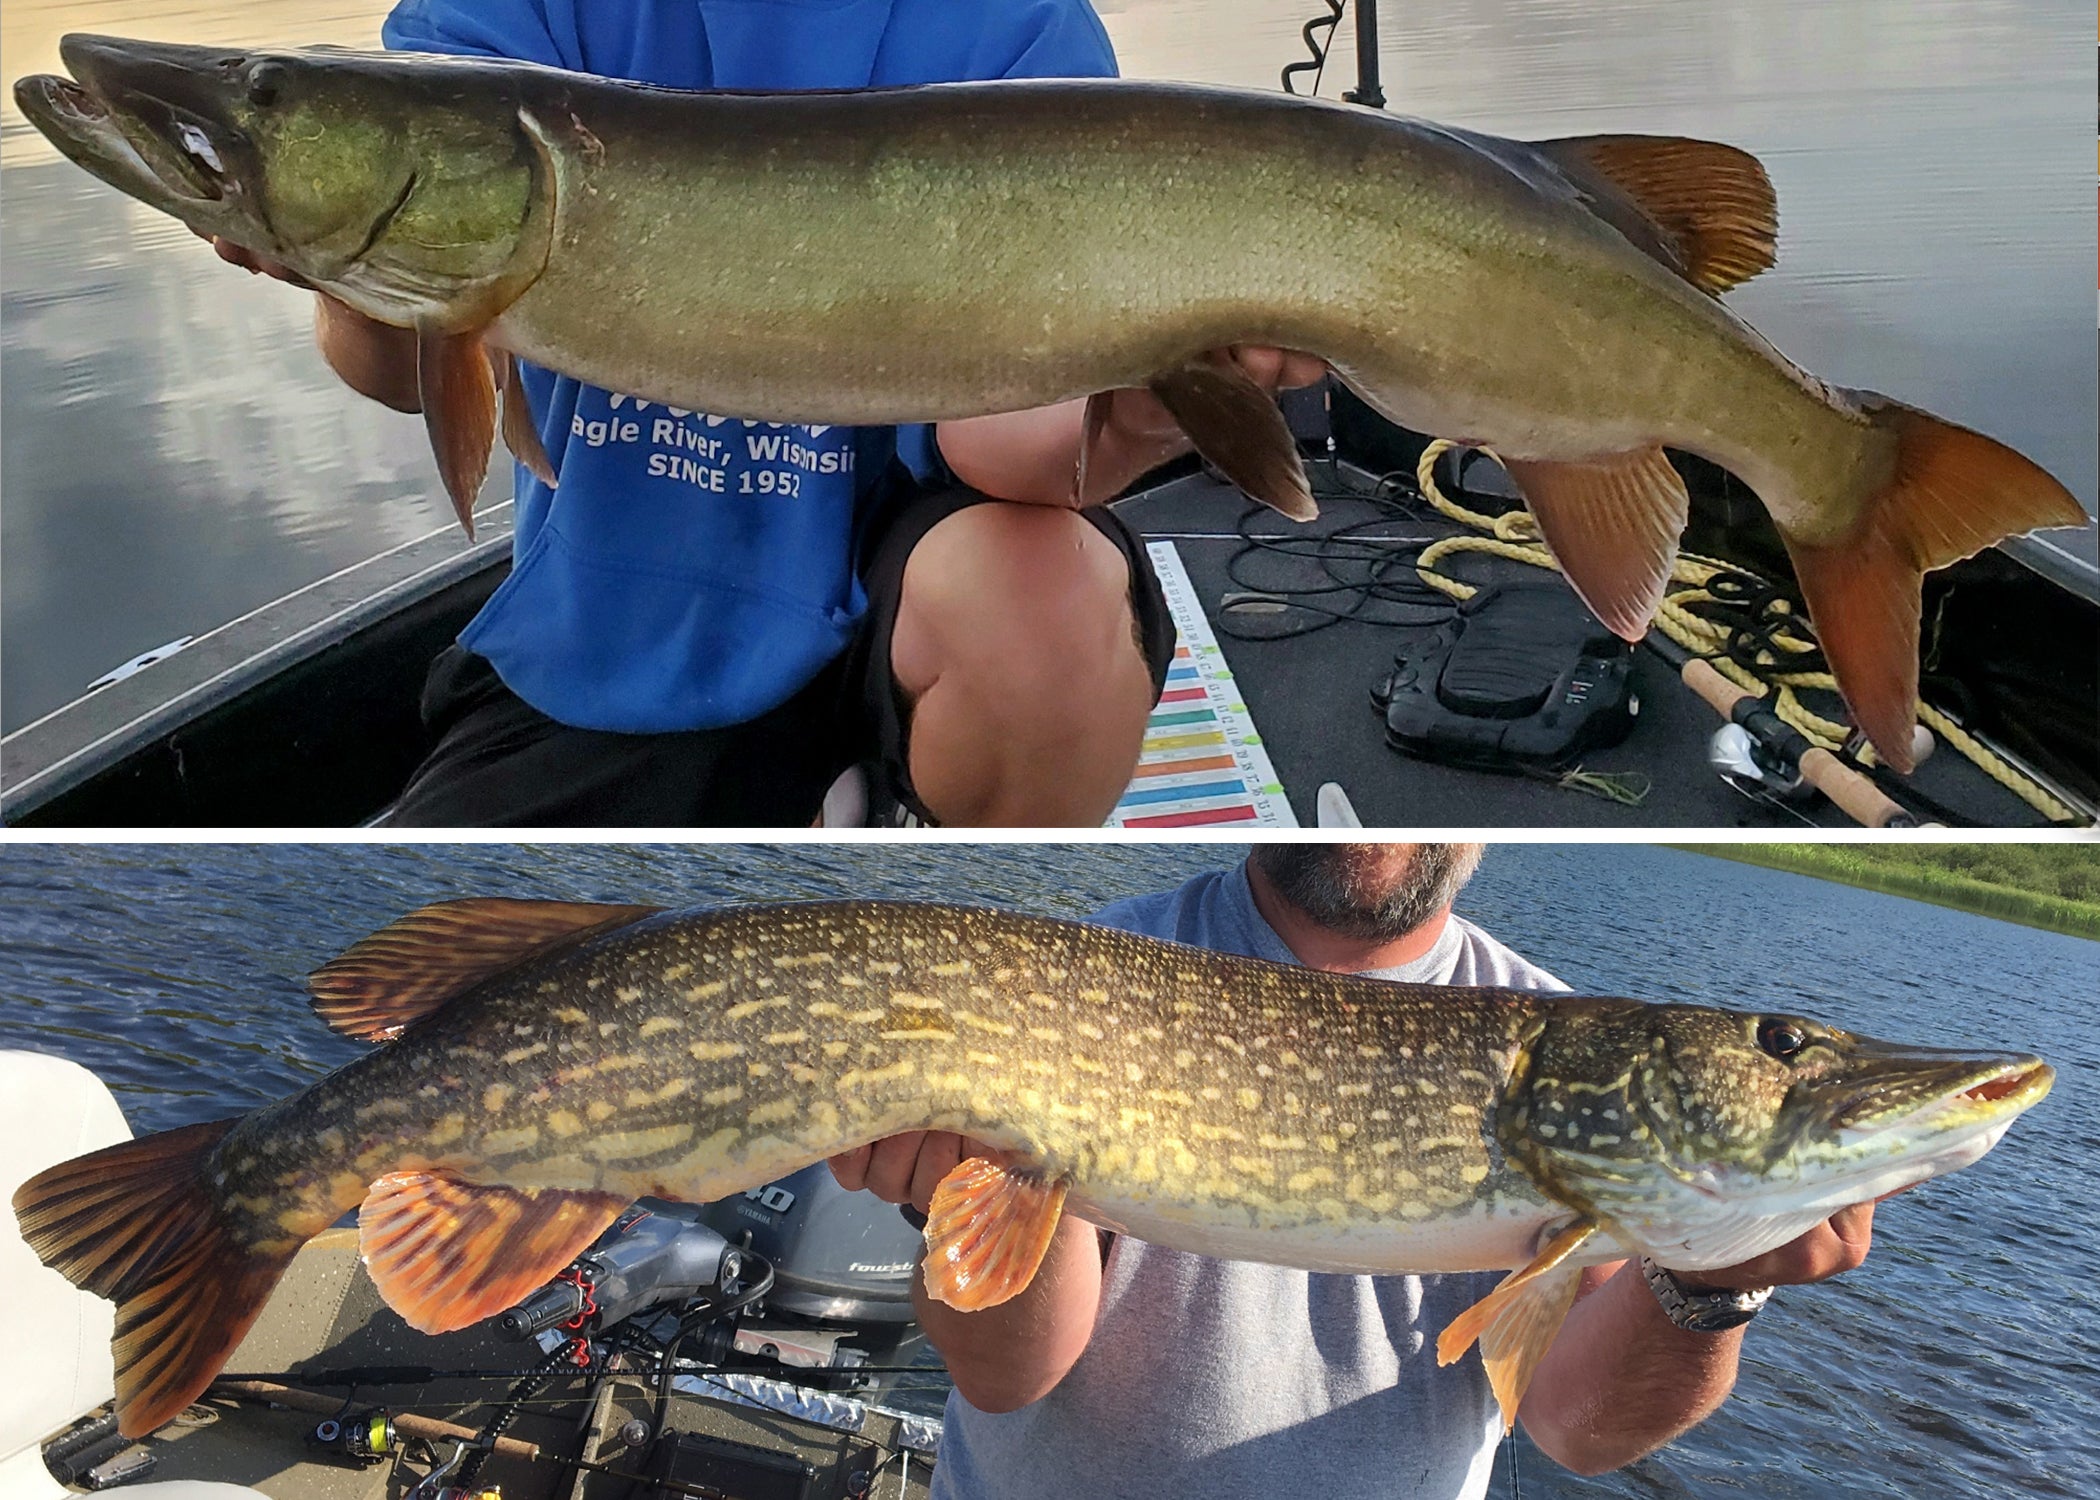 split photo showing muskie vs pike, with muskie on top and pike on the bottom